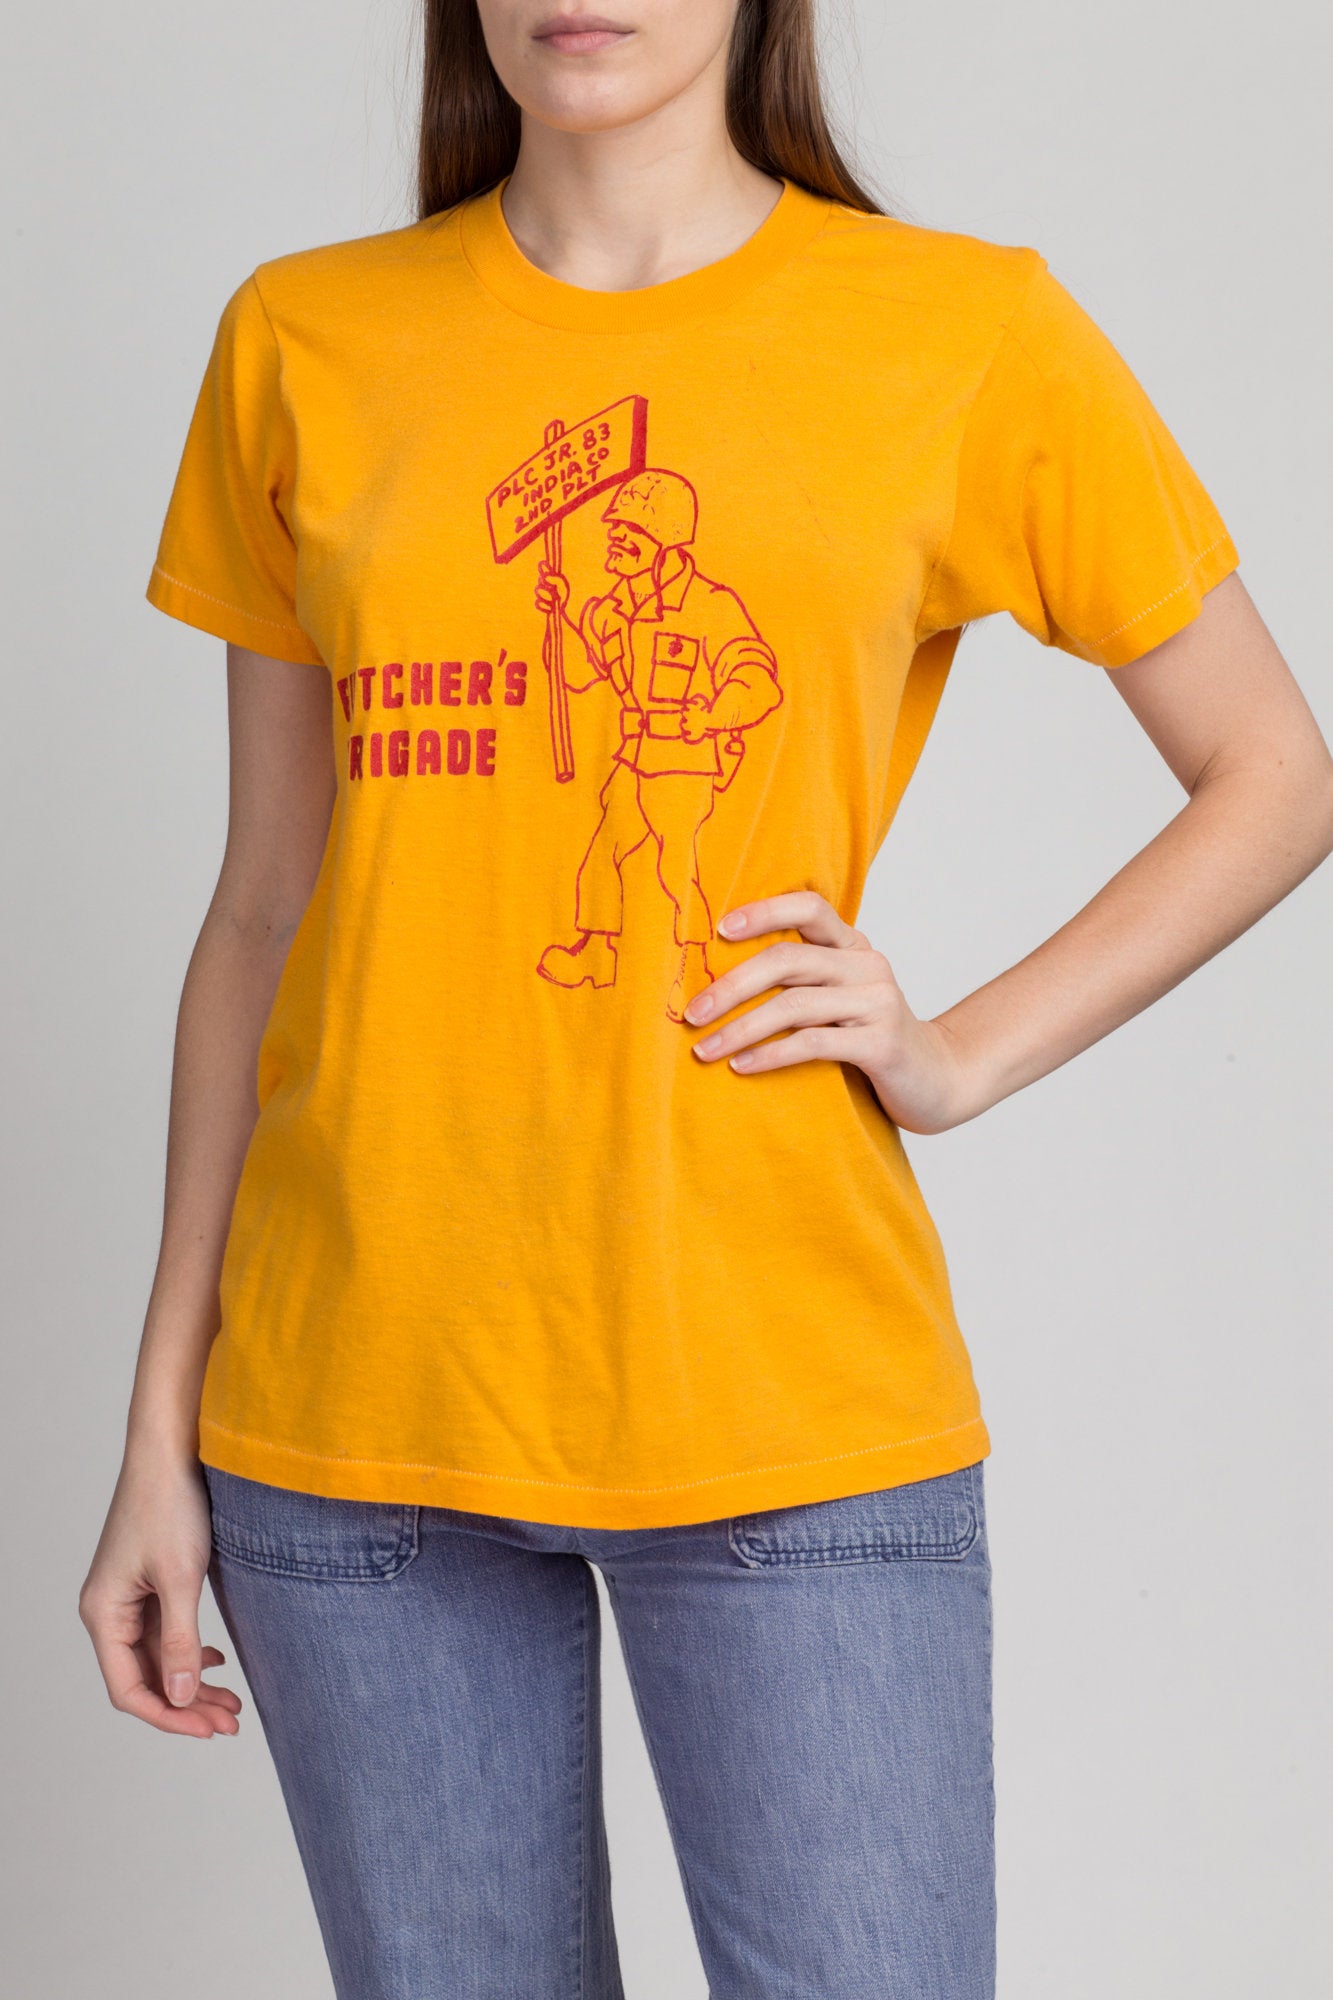 80s Butcher&#39;s Brigade Graphic T Shirt - Medium to Large | Vintage Screen Stars Yellow Army Tee